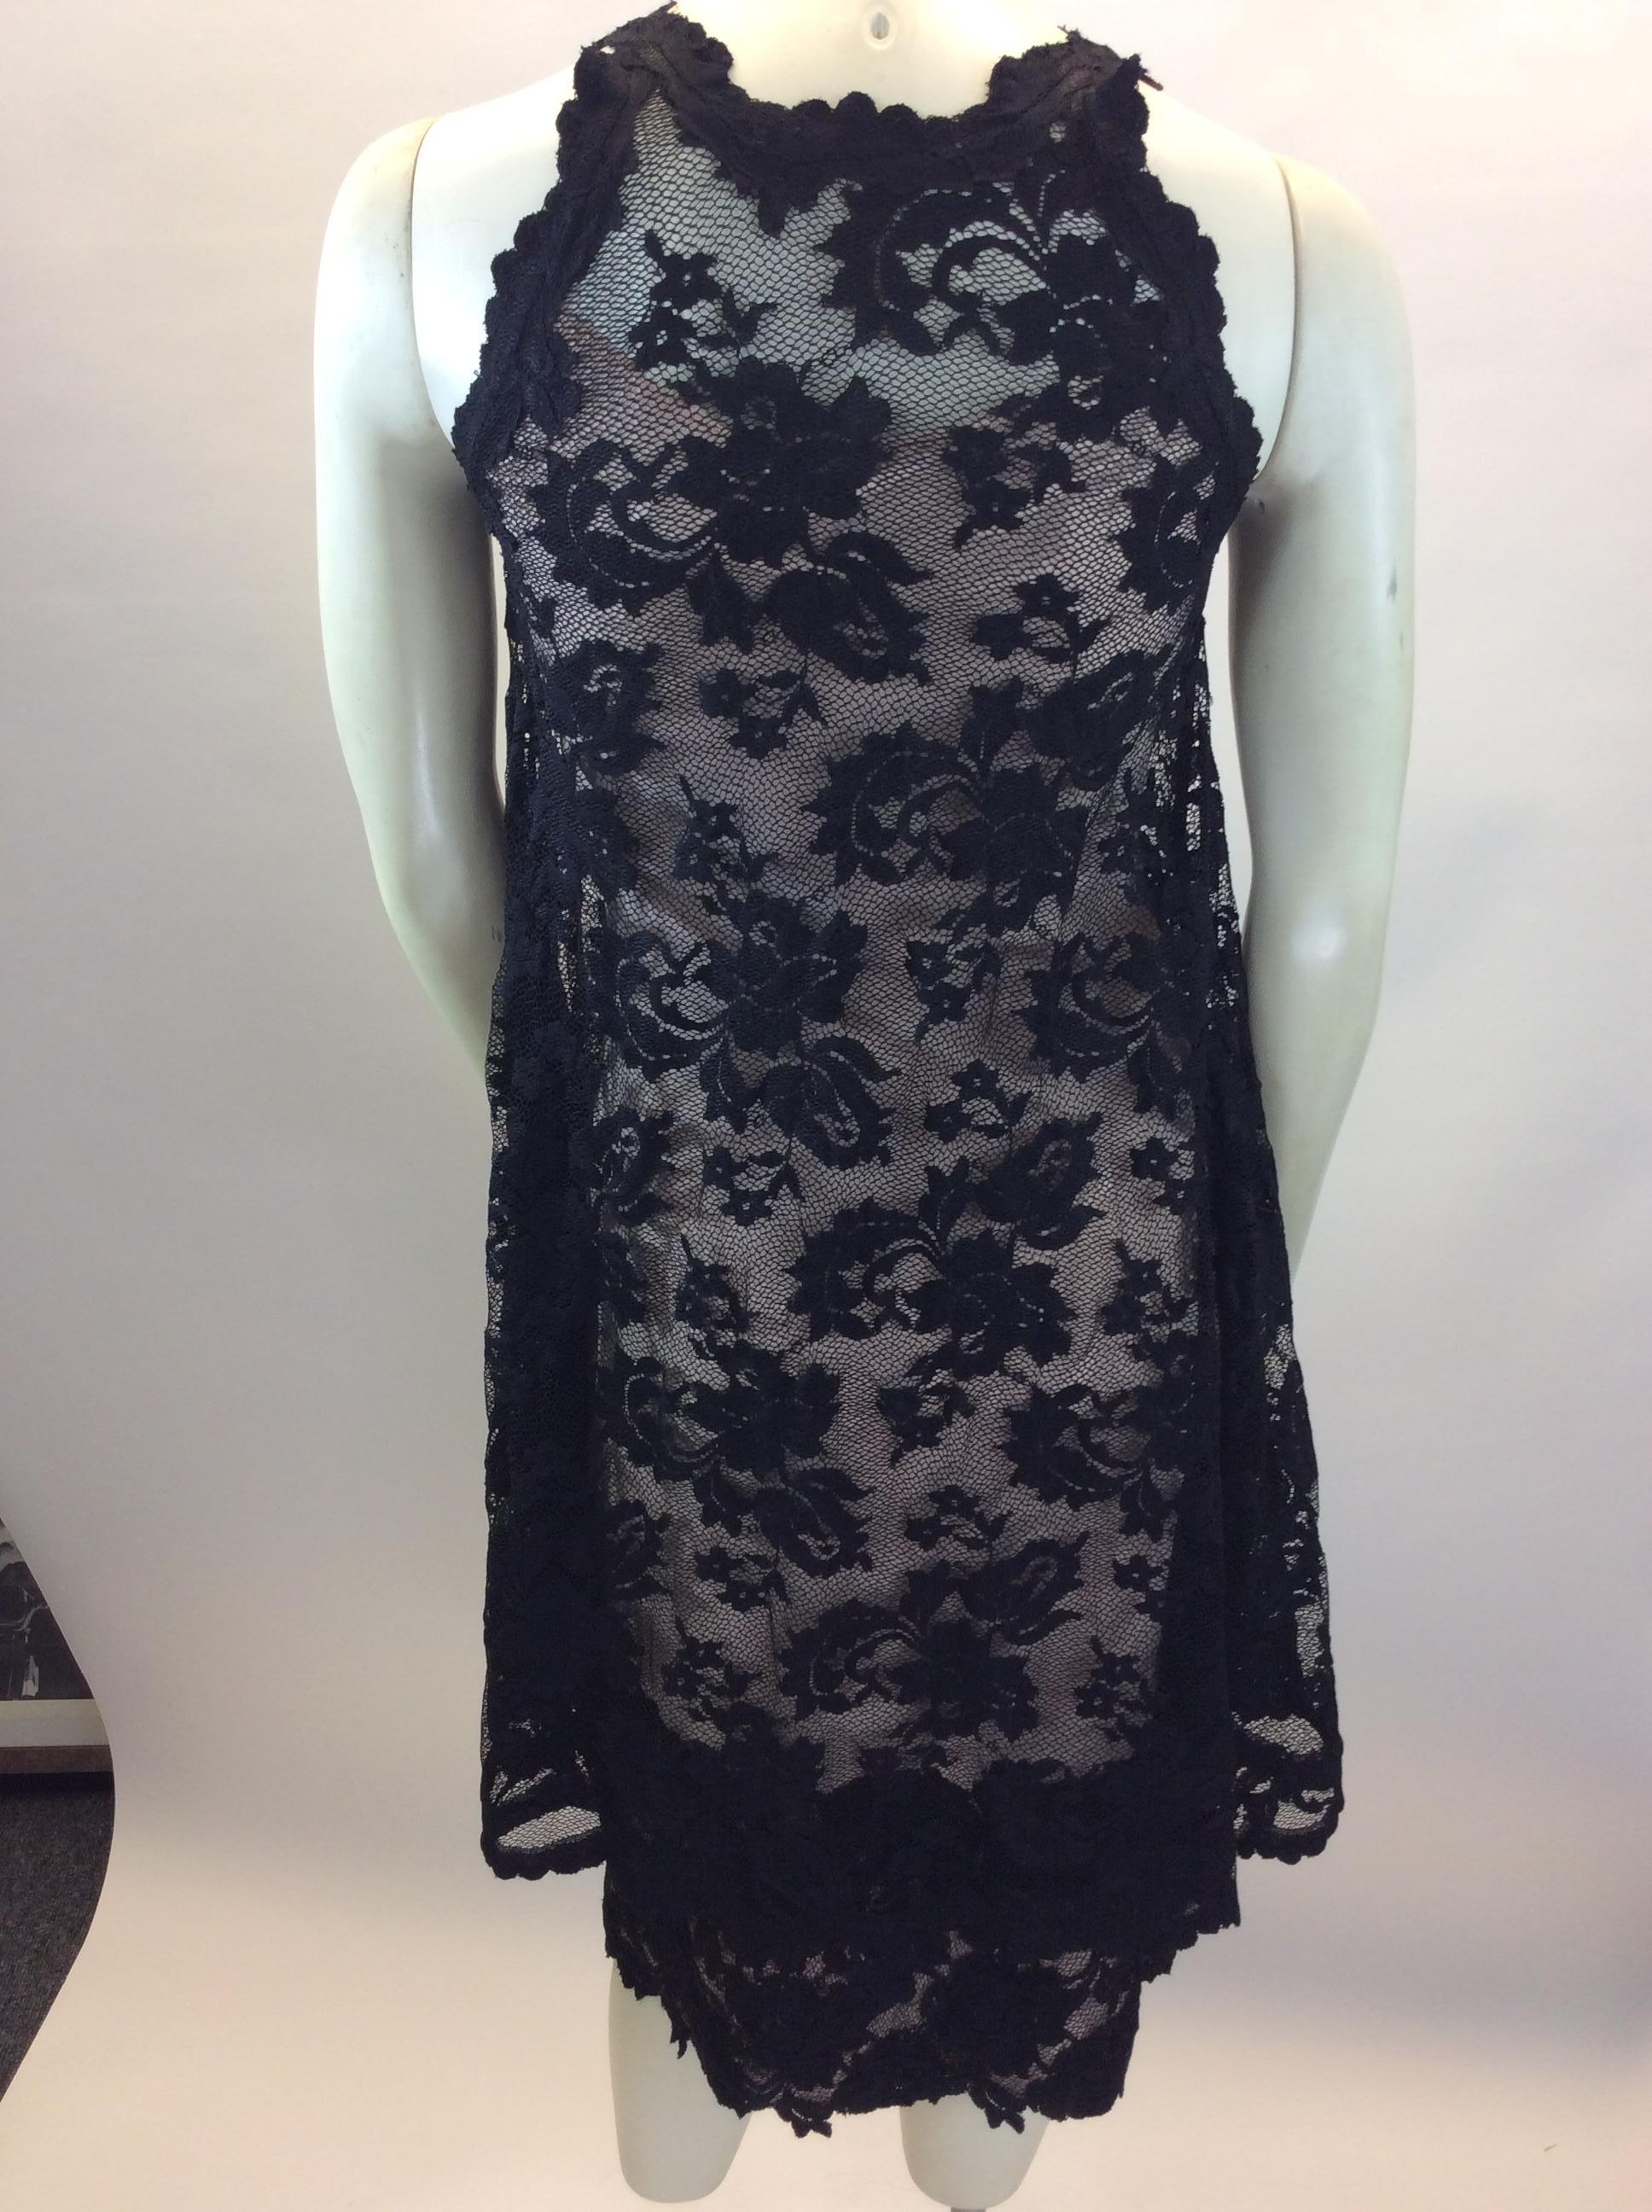 Olvi's Black Lace Dress In Good Condition For Sale In Narberth, PA